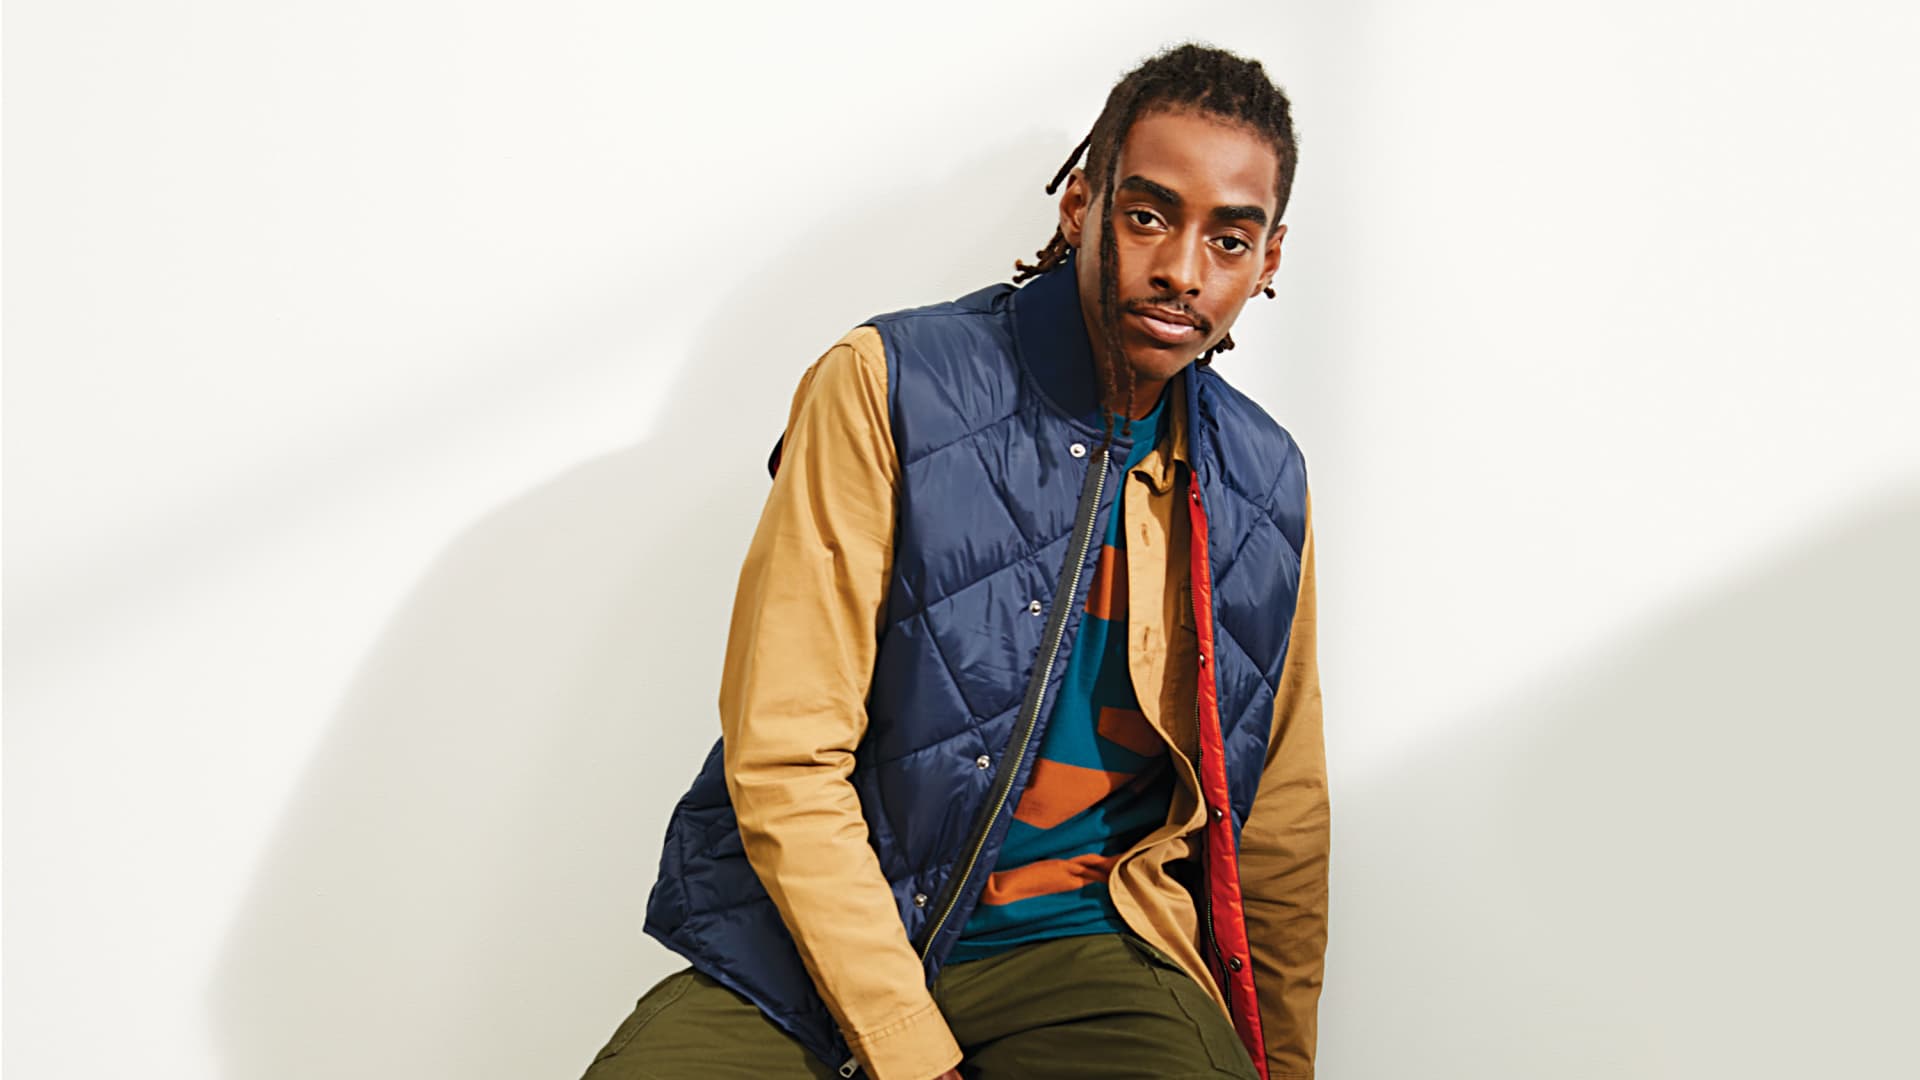 Walmart has added more private label apparel brand. It debuted Free Assembly, an exclusive line of everyday pieces for men and women designed by the former chief creative officer at Bonobos.